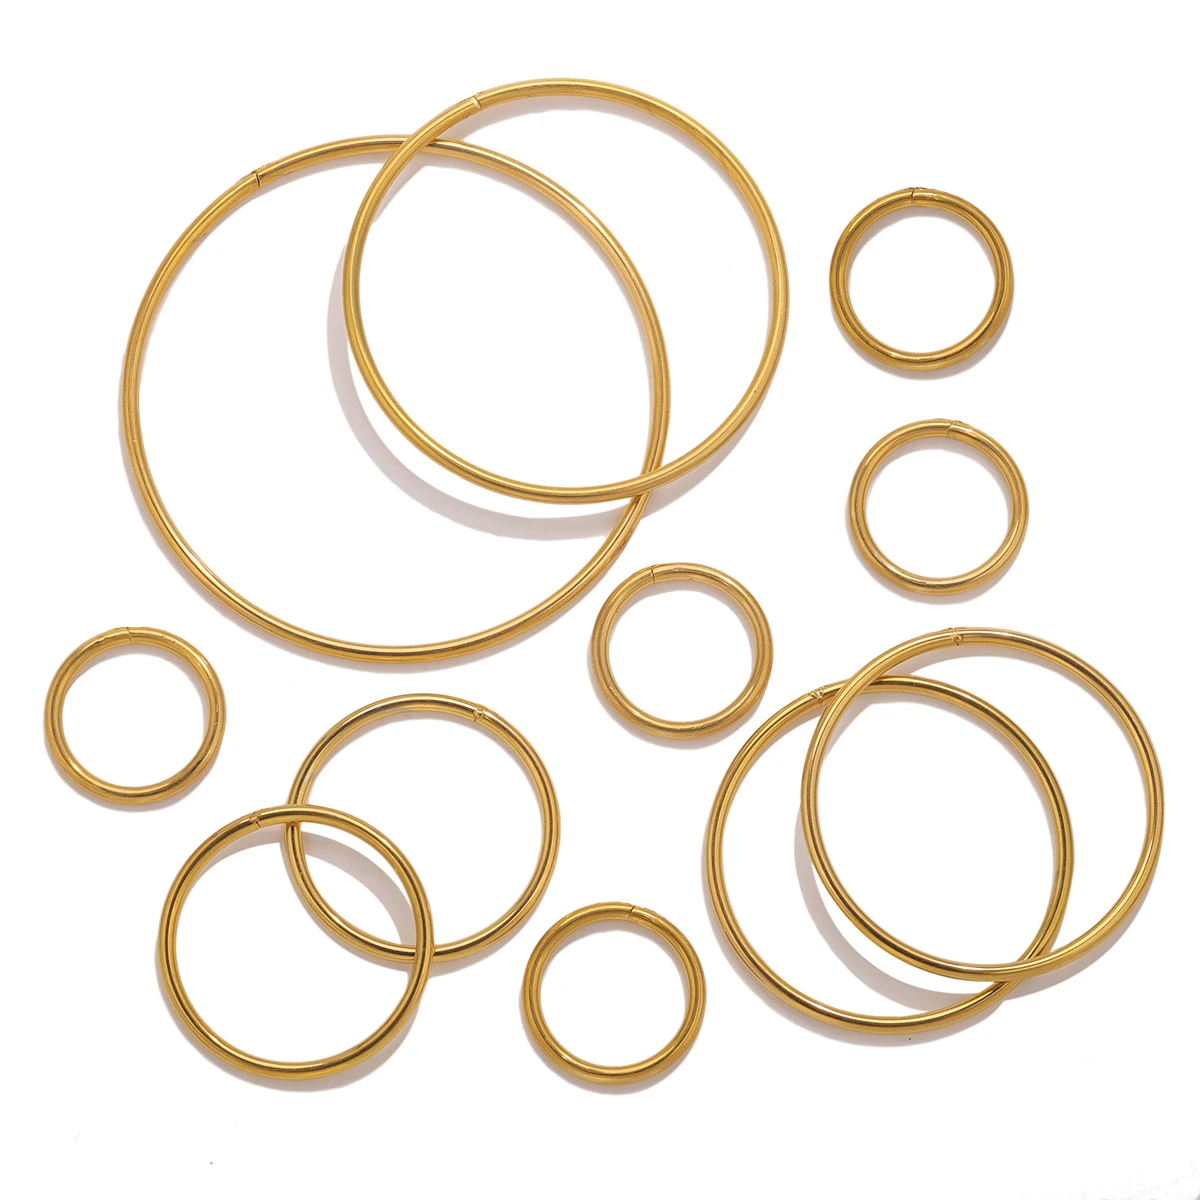 10pcs Stainless Steel Circle Ring Hoops Earring Wires Connectors Closed Circle Rings For DIY Pendant Jewelry Making Wholesale